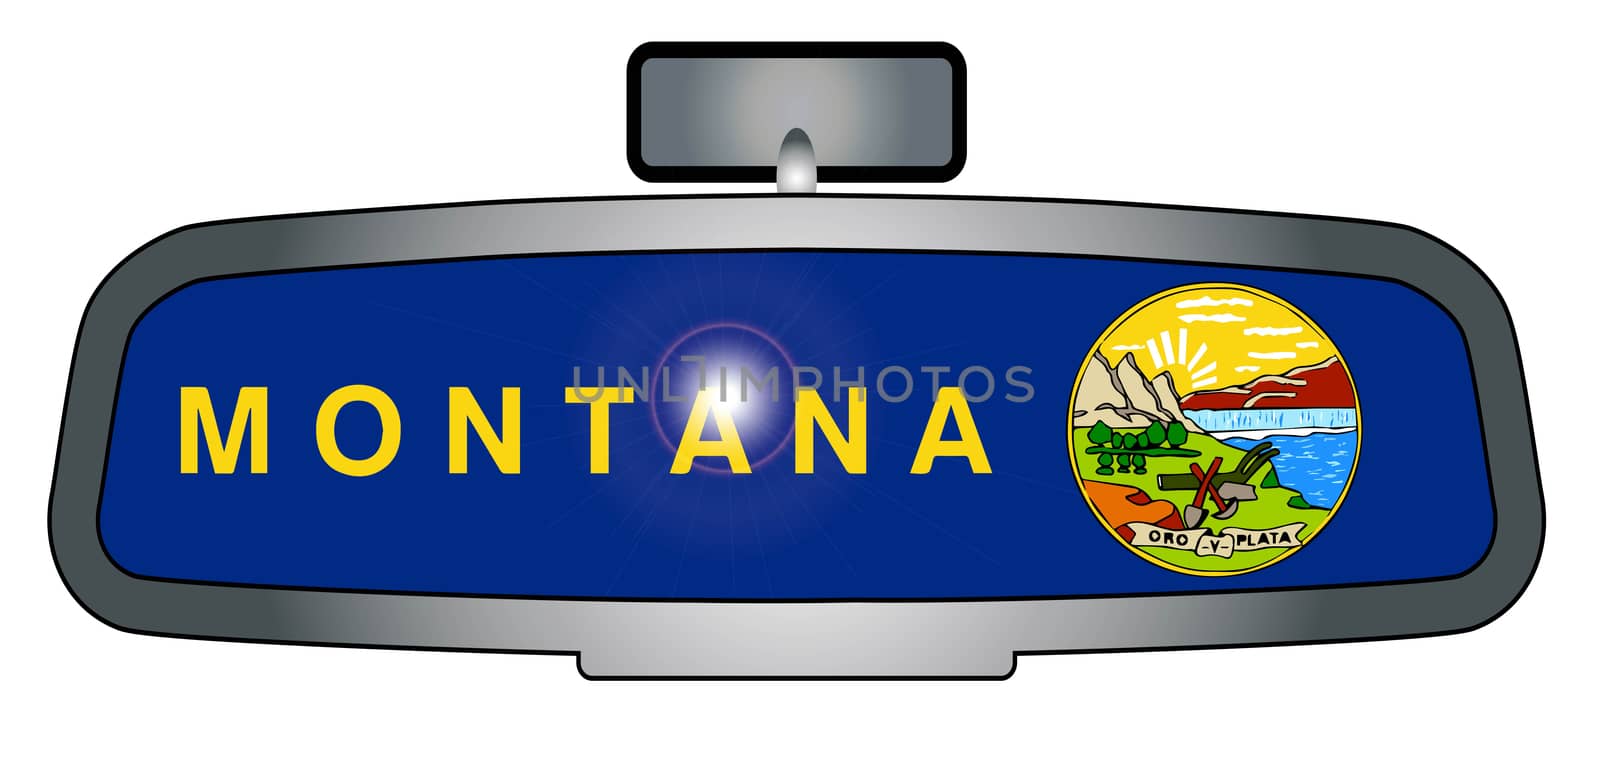 A vehicle rear view mirror with the emblems from the state flag of Montana